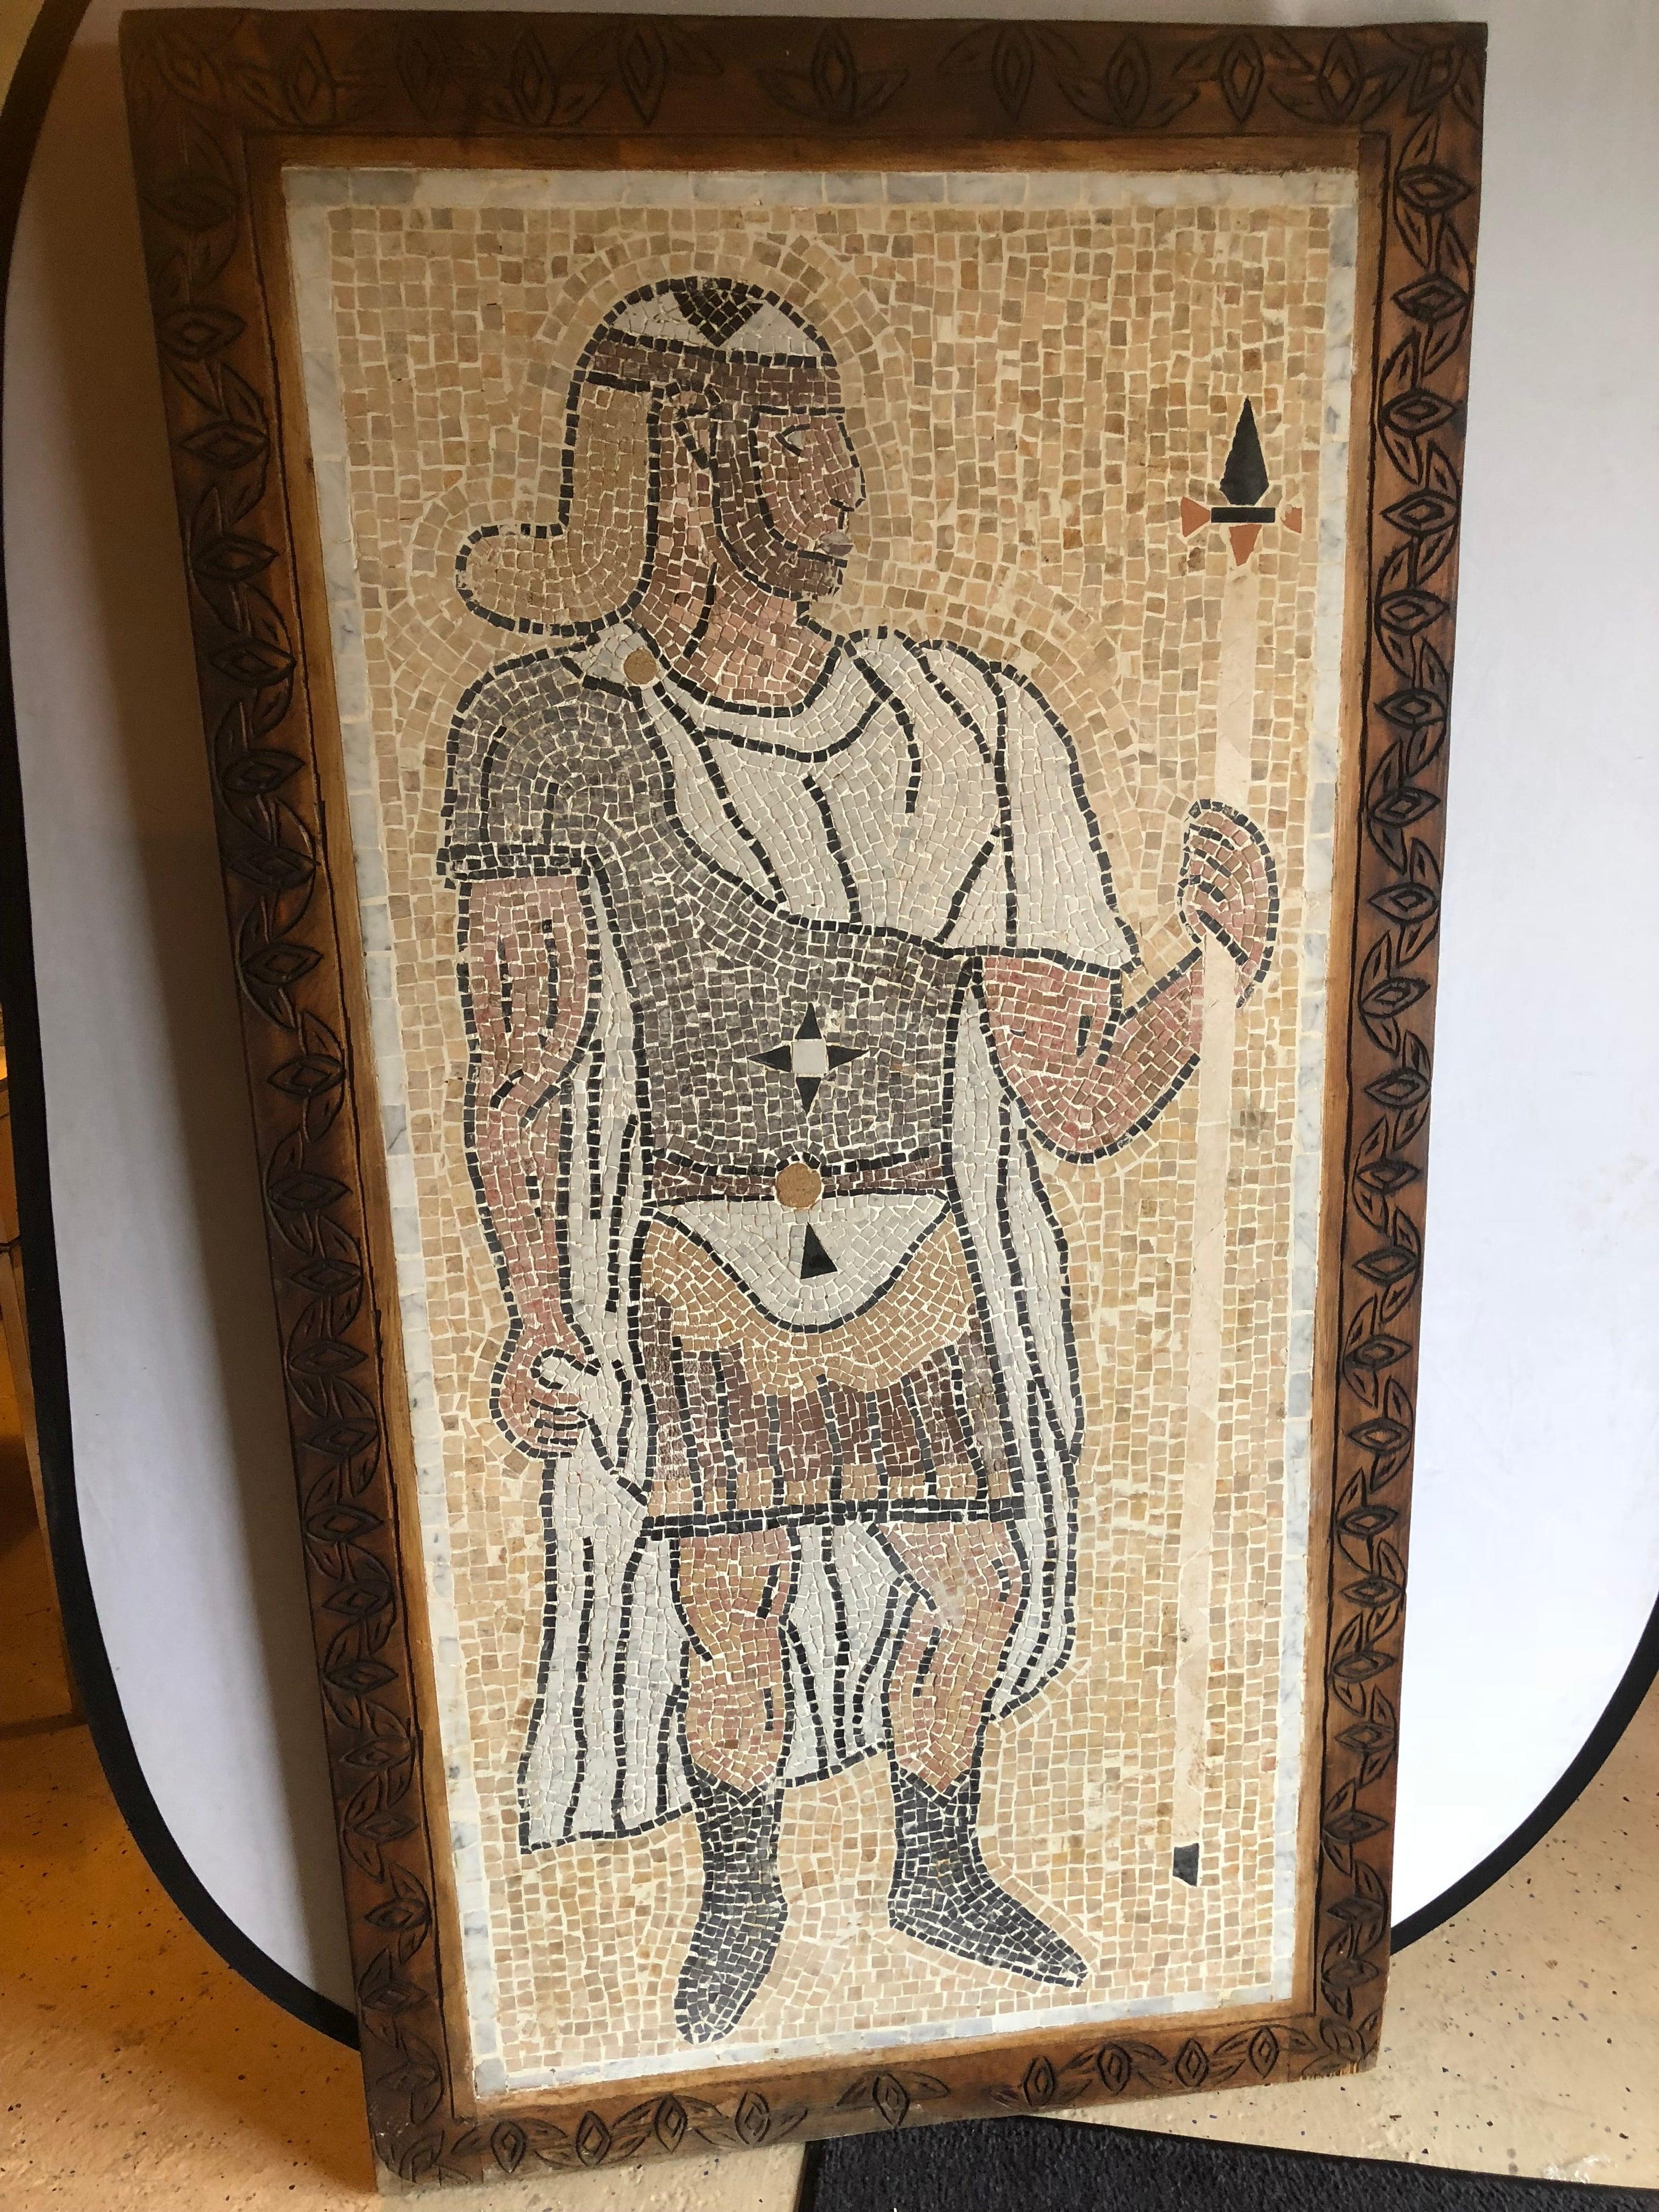 A Mid Century Italian Mosaic Tile Wall Plaque or Table Top of a Centurion in Wood Carved Frame. The palatial micro mosaic tile wall art shows  a centurion standing tall and holding his spear. The tile plaque comes in a beautifully carved and